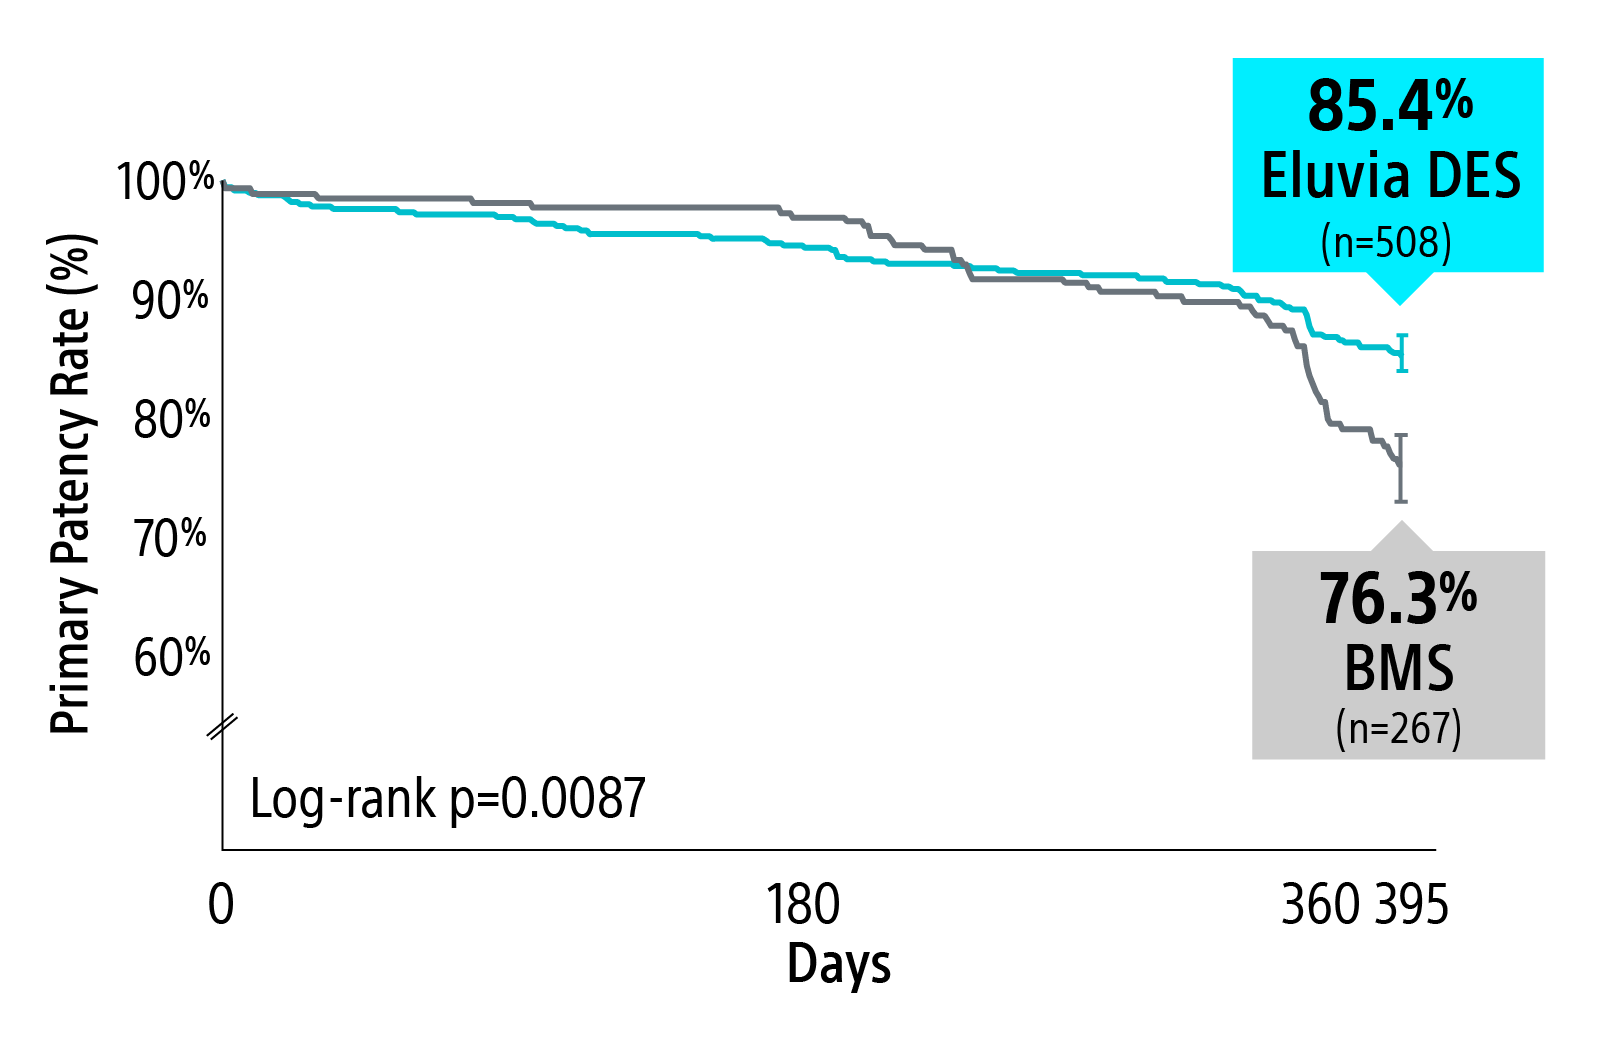 1-year KM Chart primary patency estimate comparing Eluvia at 85.4% and BMS at 76.3%